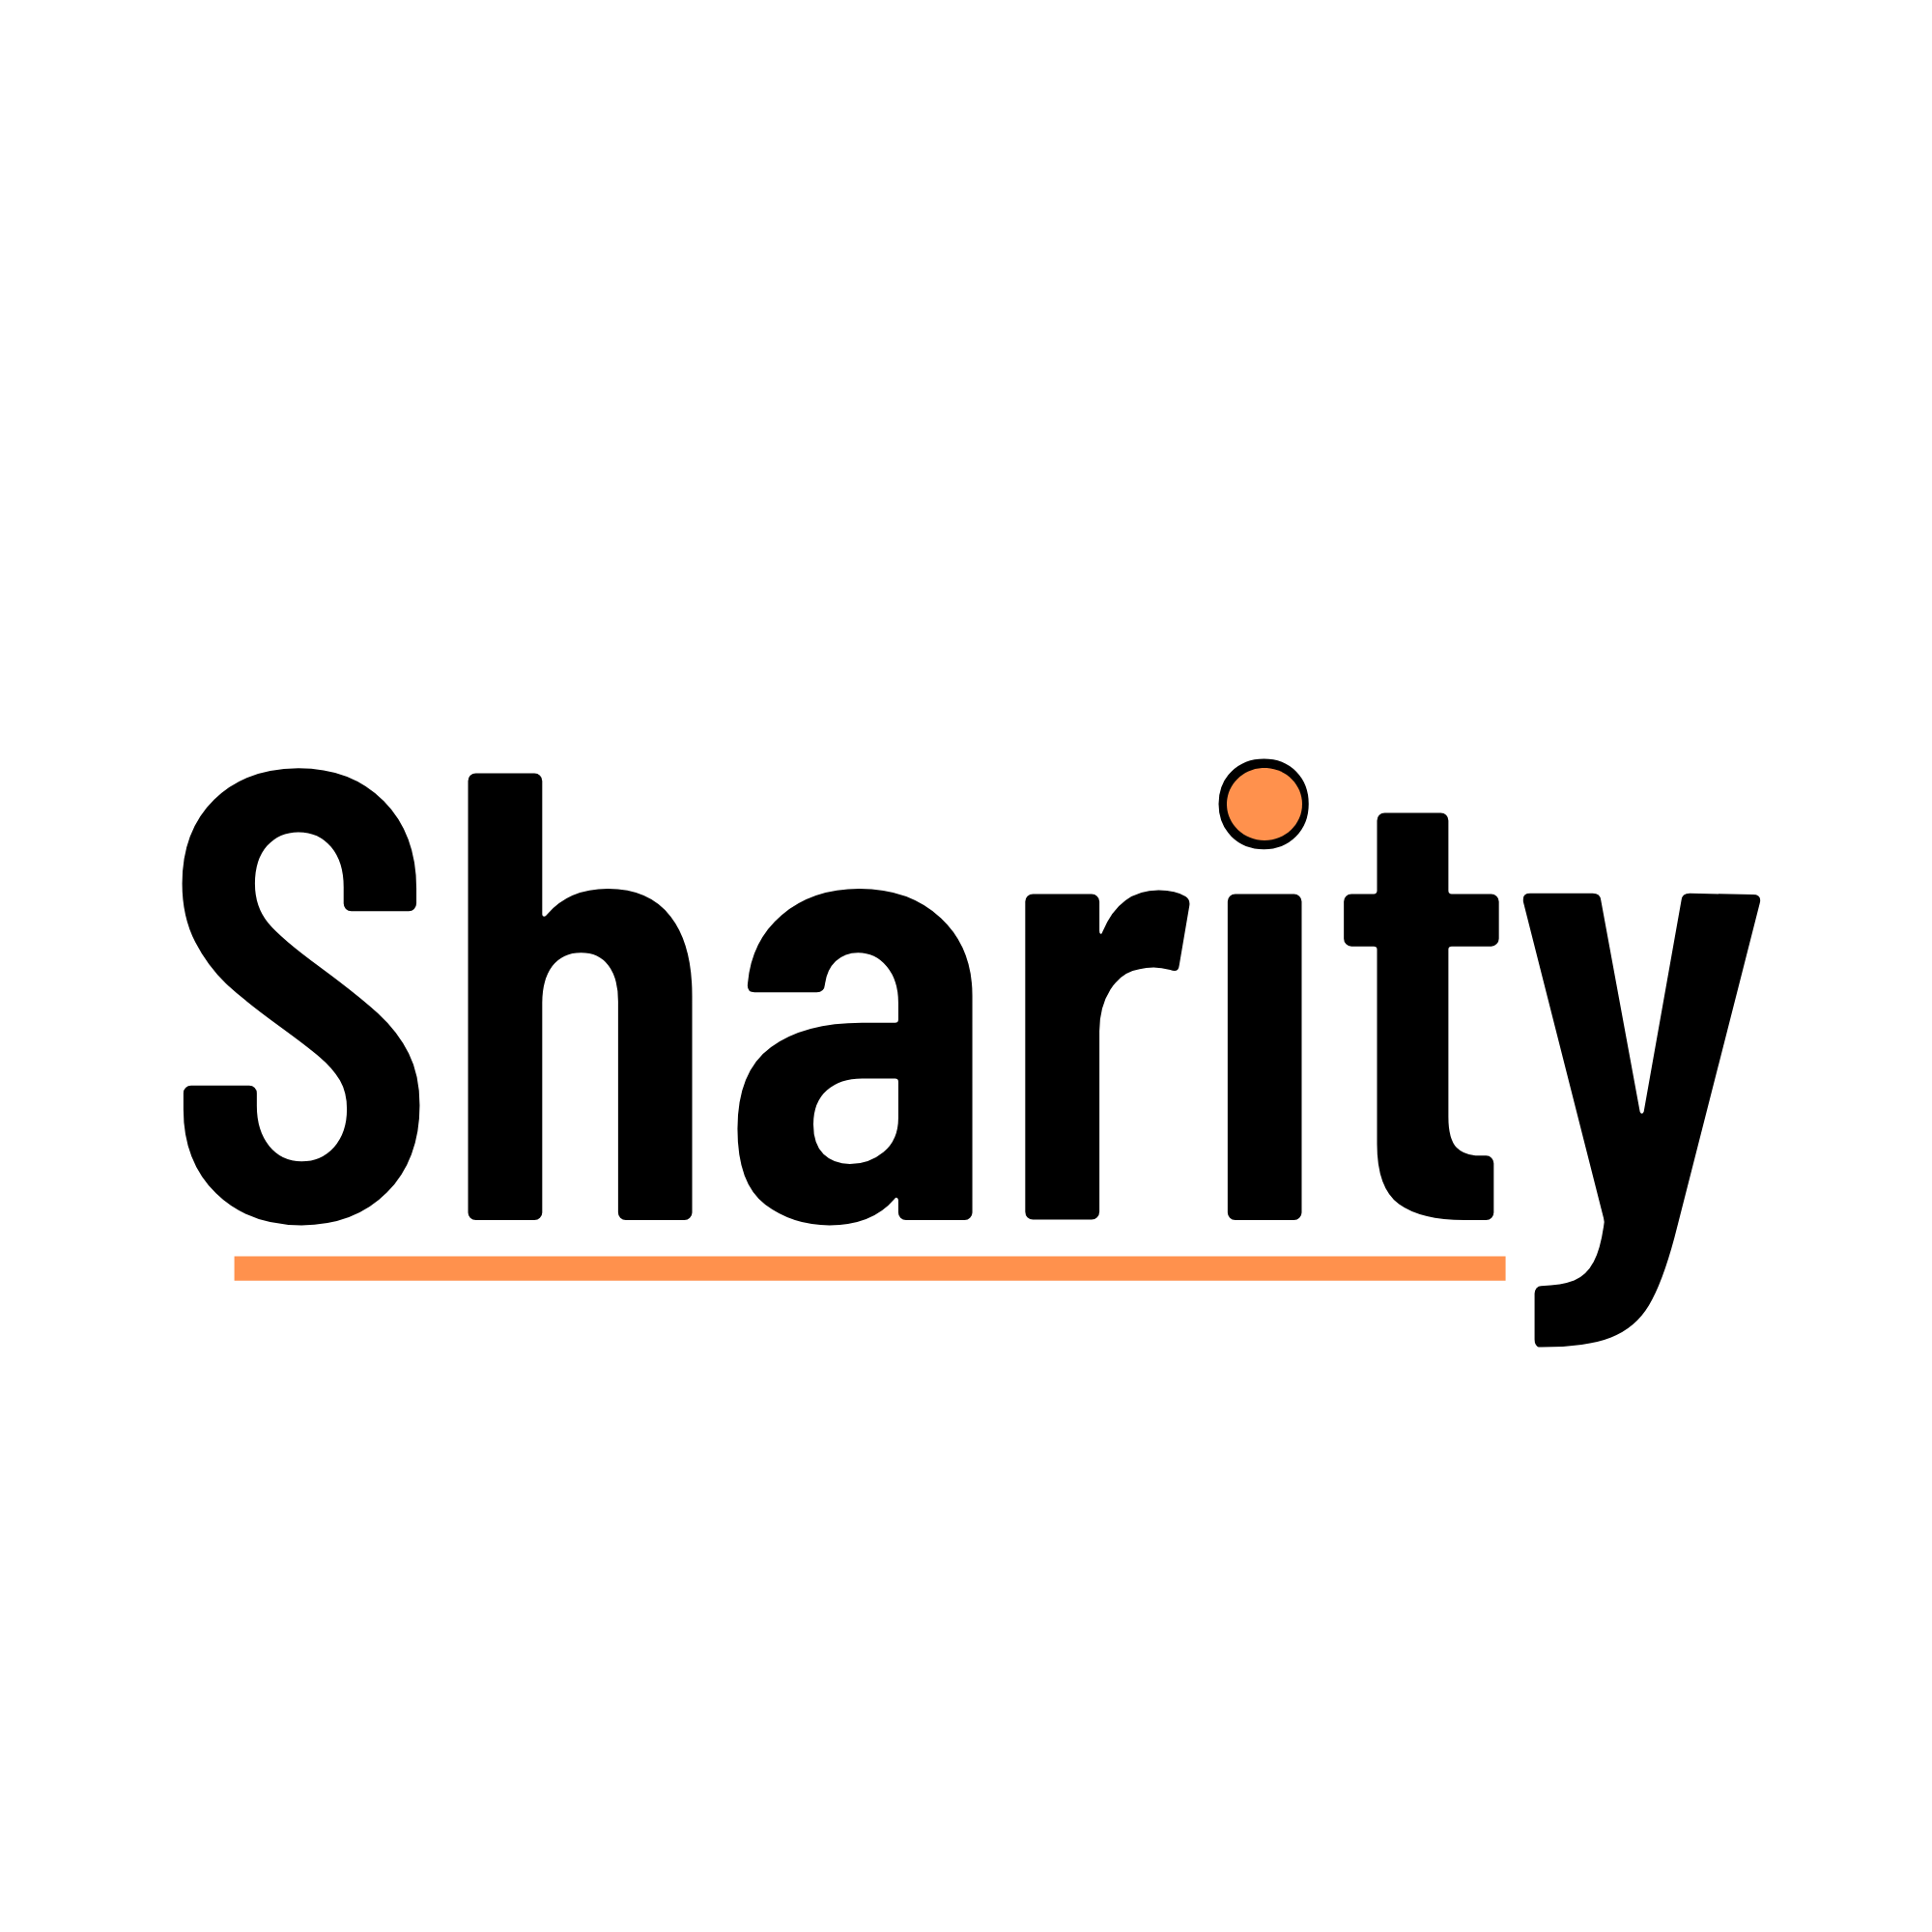 Sharity (2000 × 2000 px) - NT.png